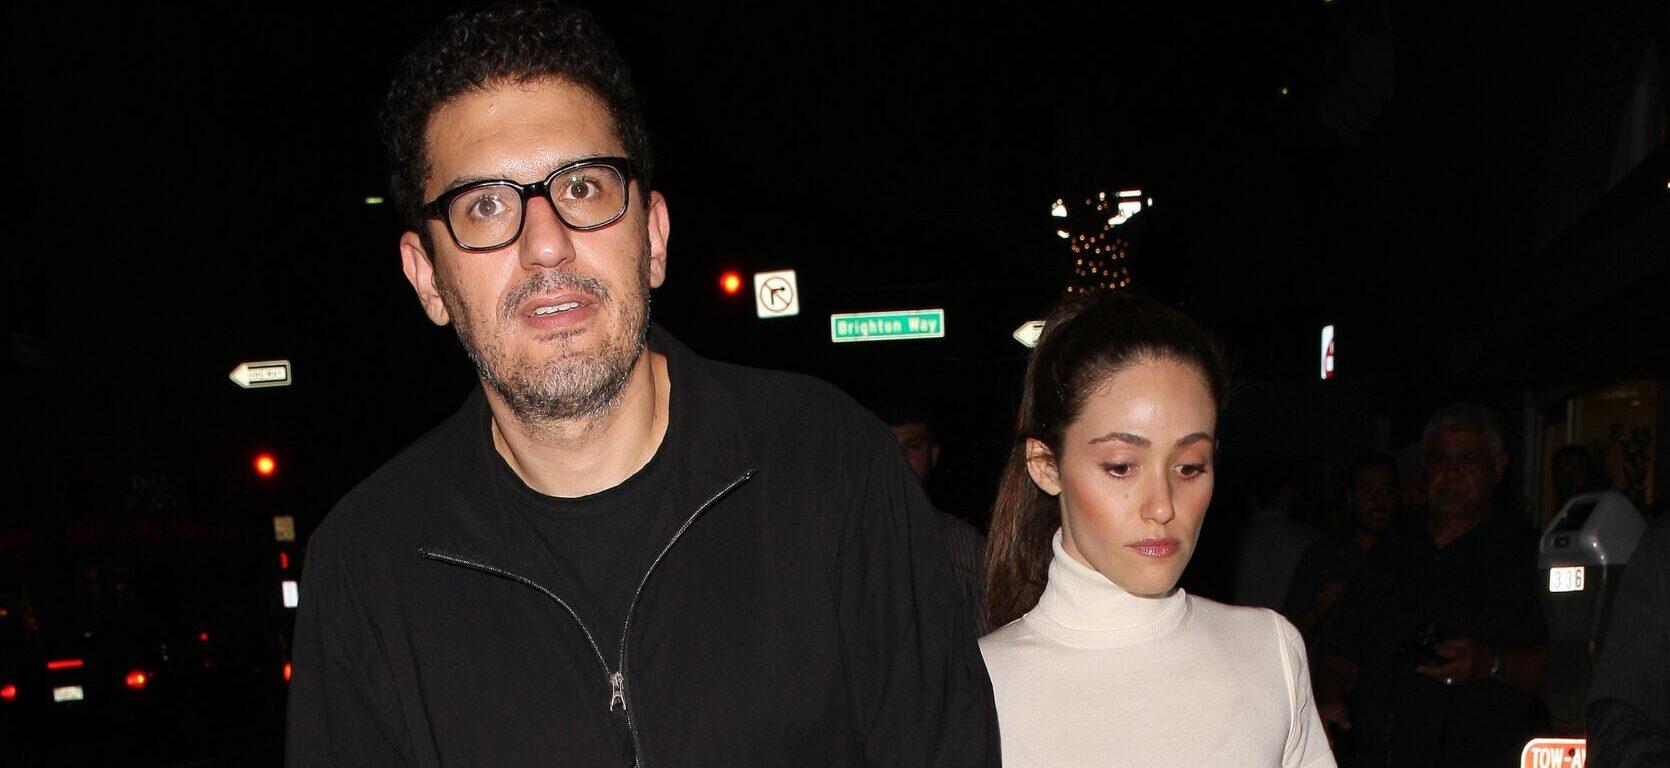 Emmy Rossum and Sam Esmail are spotted leaving Italian Restaurant Madeo after having a romantic dinner date